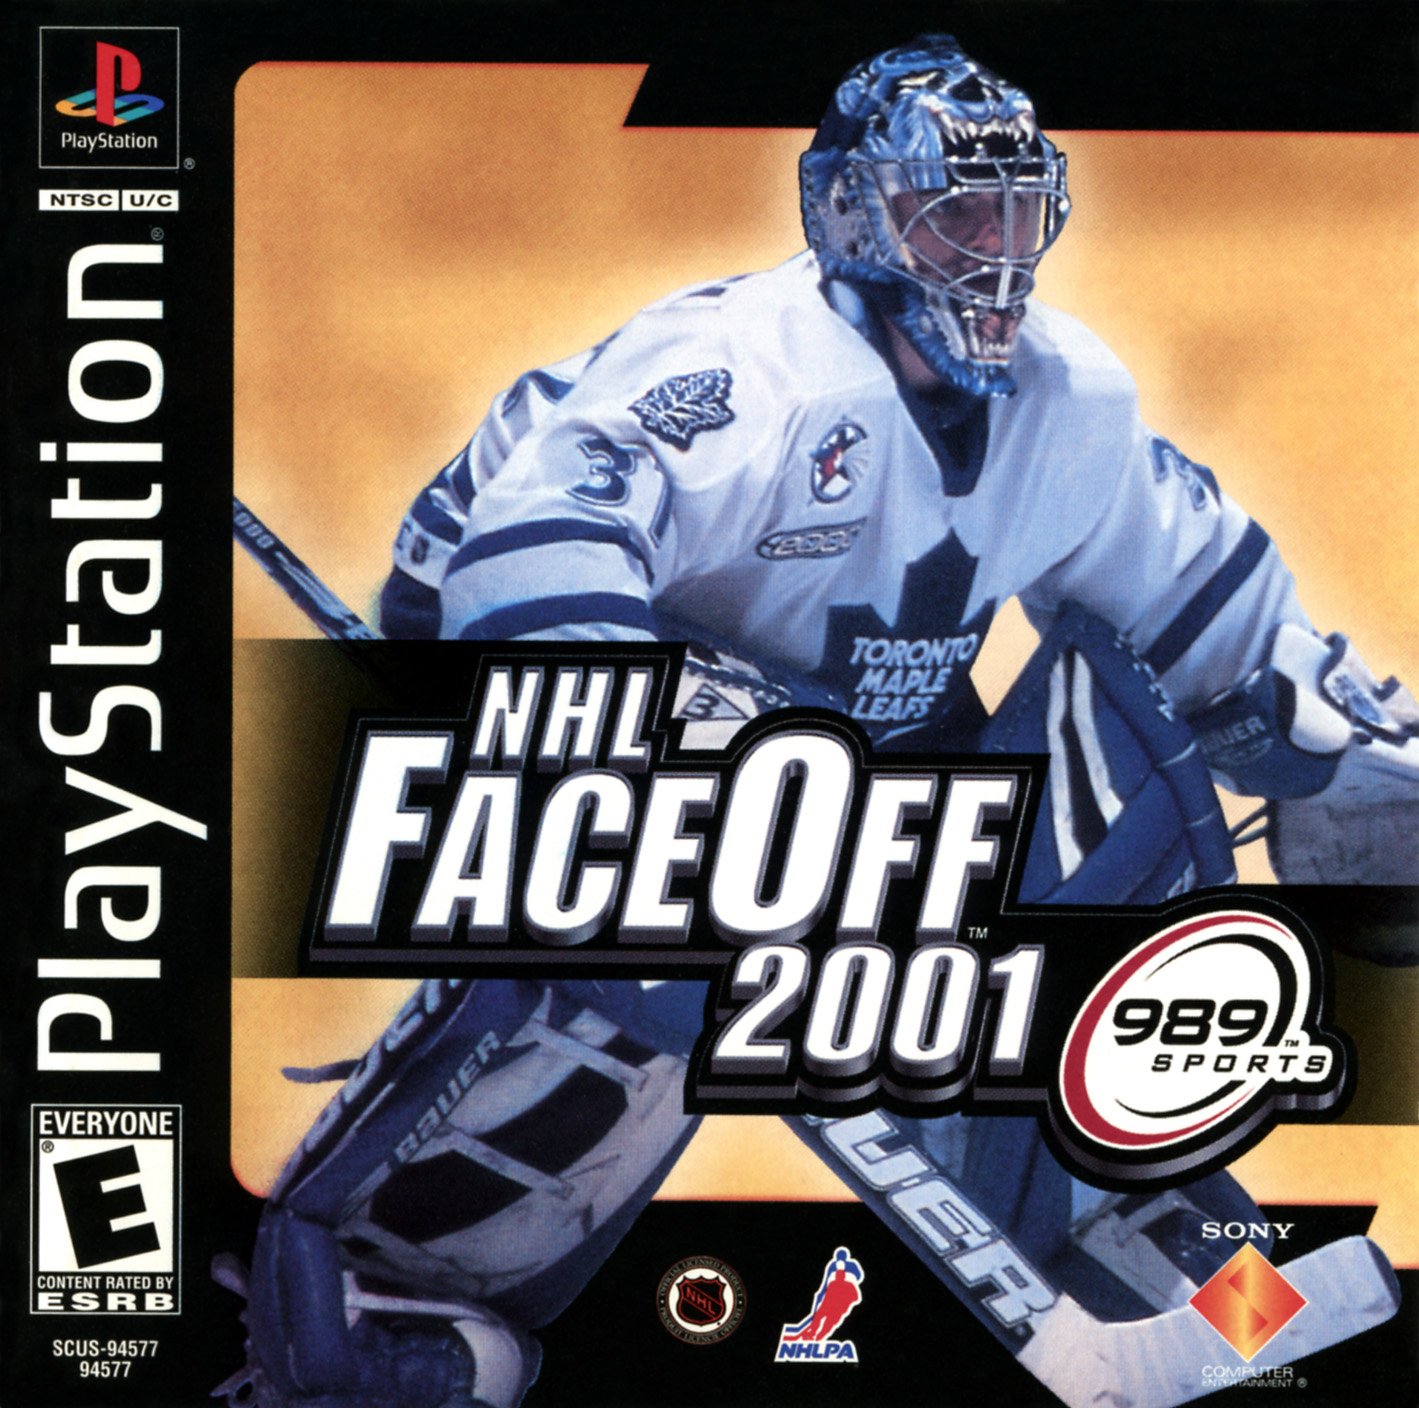 Image of NHL FaceOff 2001